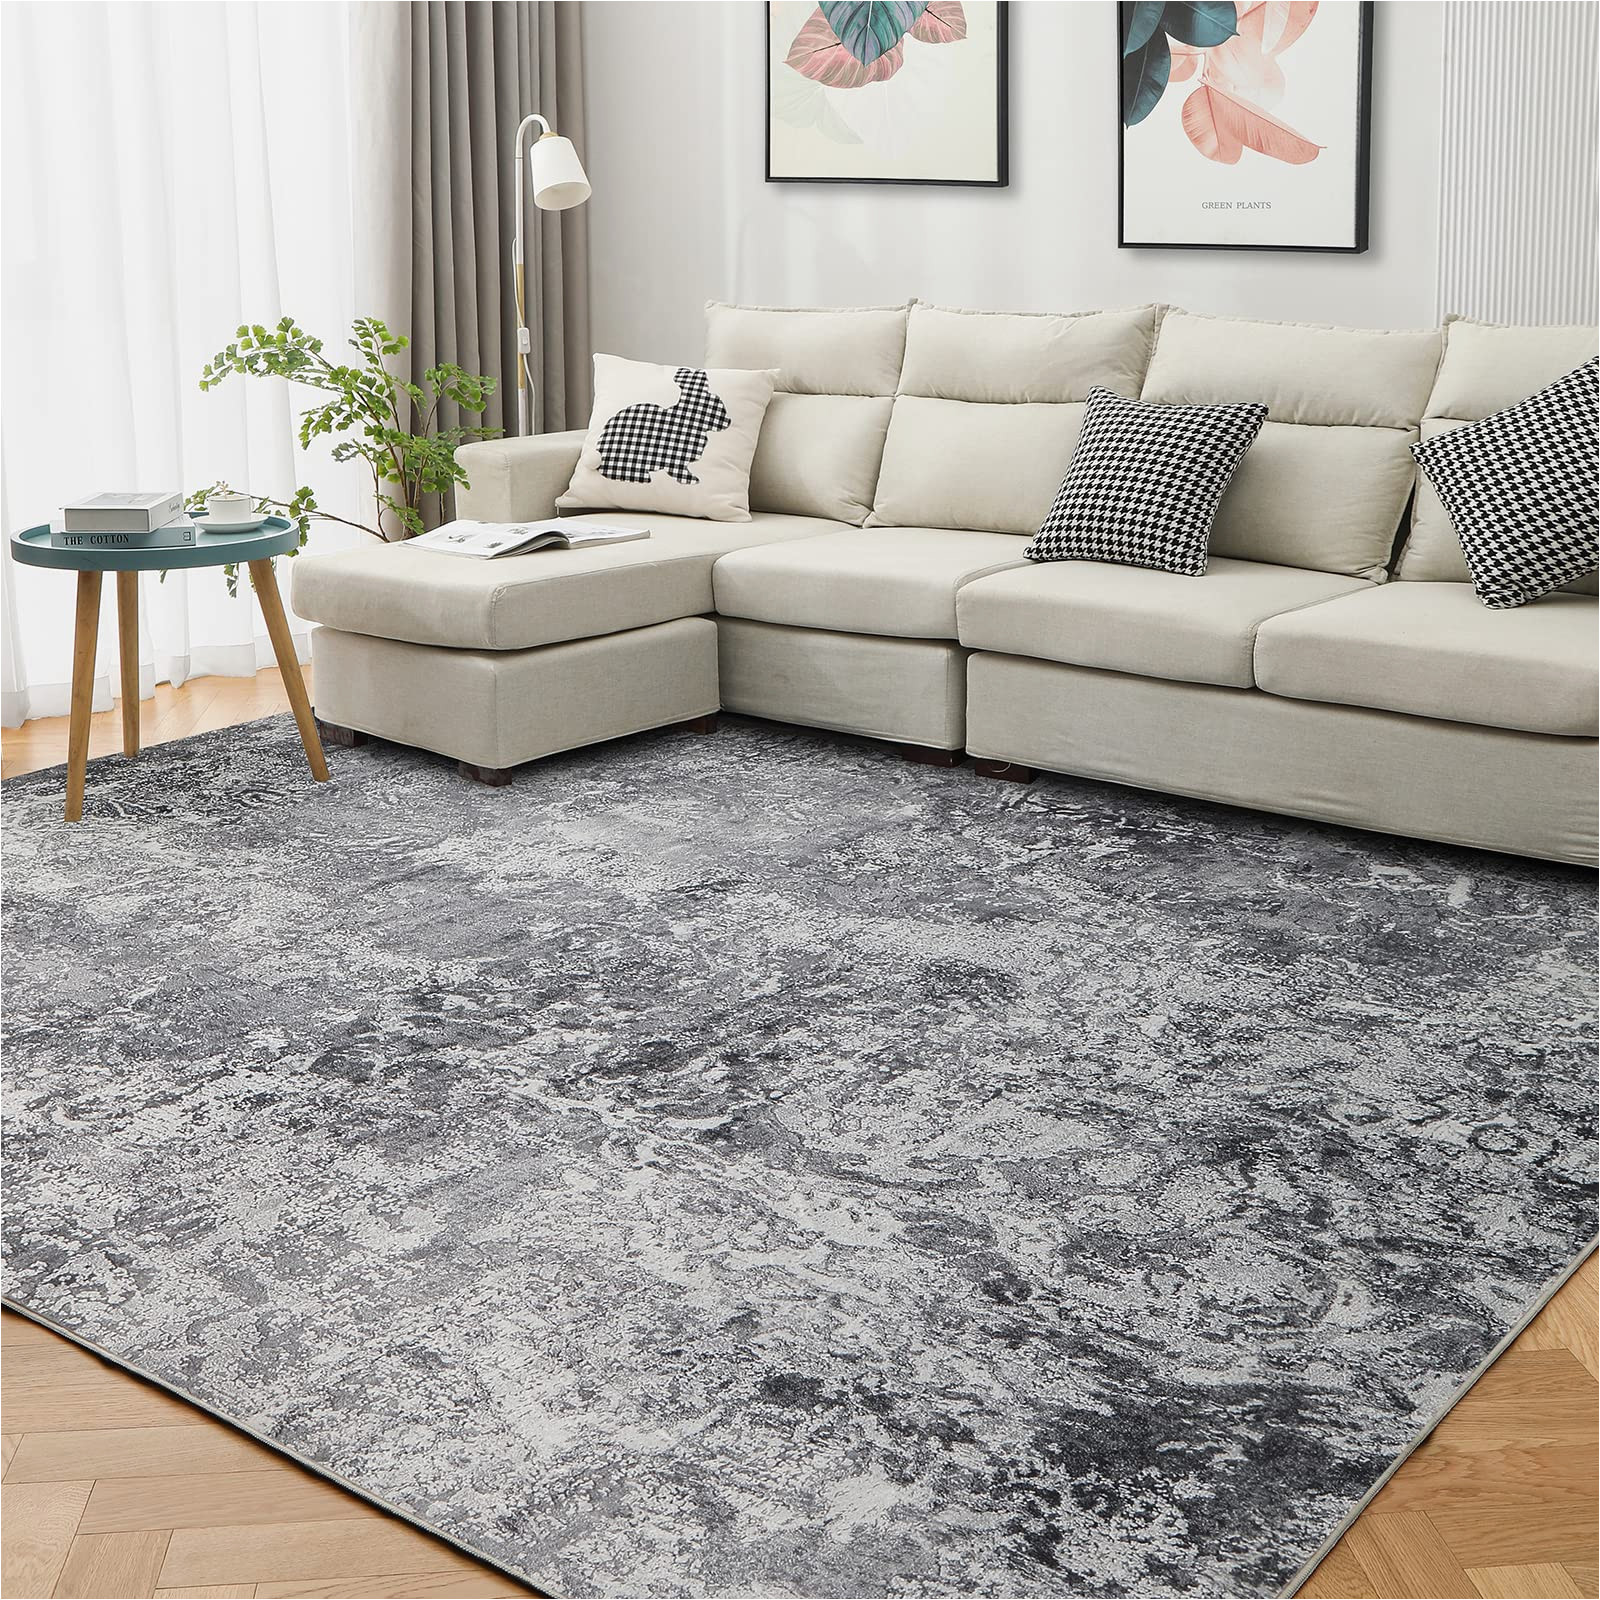 Home Goods area Rugs 8 X 10 area Rug Living Room Rugs: 8×10 Indoor Abstract soft Fluffy Pile Large Carpet with Low Shaggy for Bedroom Dining Room Home Office Decor Under Kitchen …